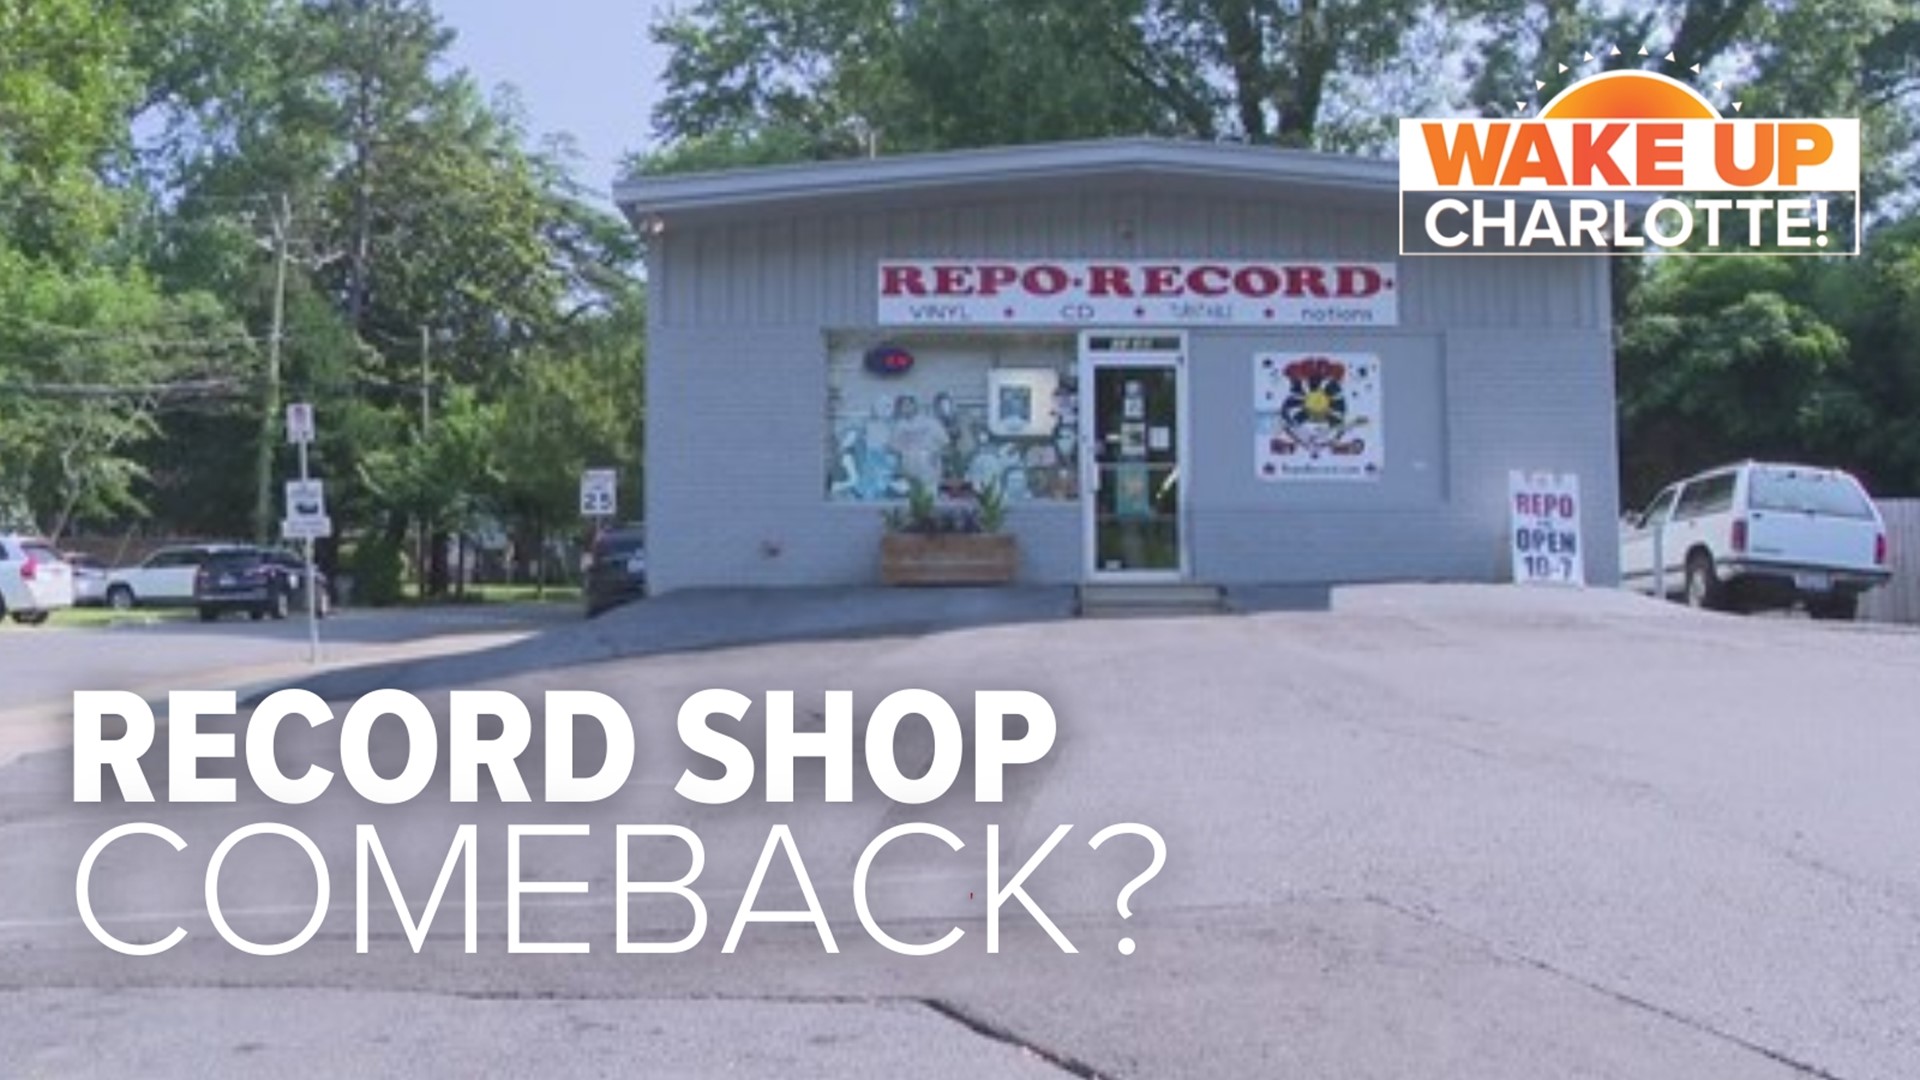 For 35 years, Repo Record has been a go-to spot for vinyl lovers in the Queen City. From classical to country, Repo has records for everyone.